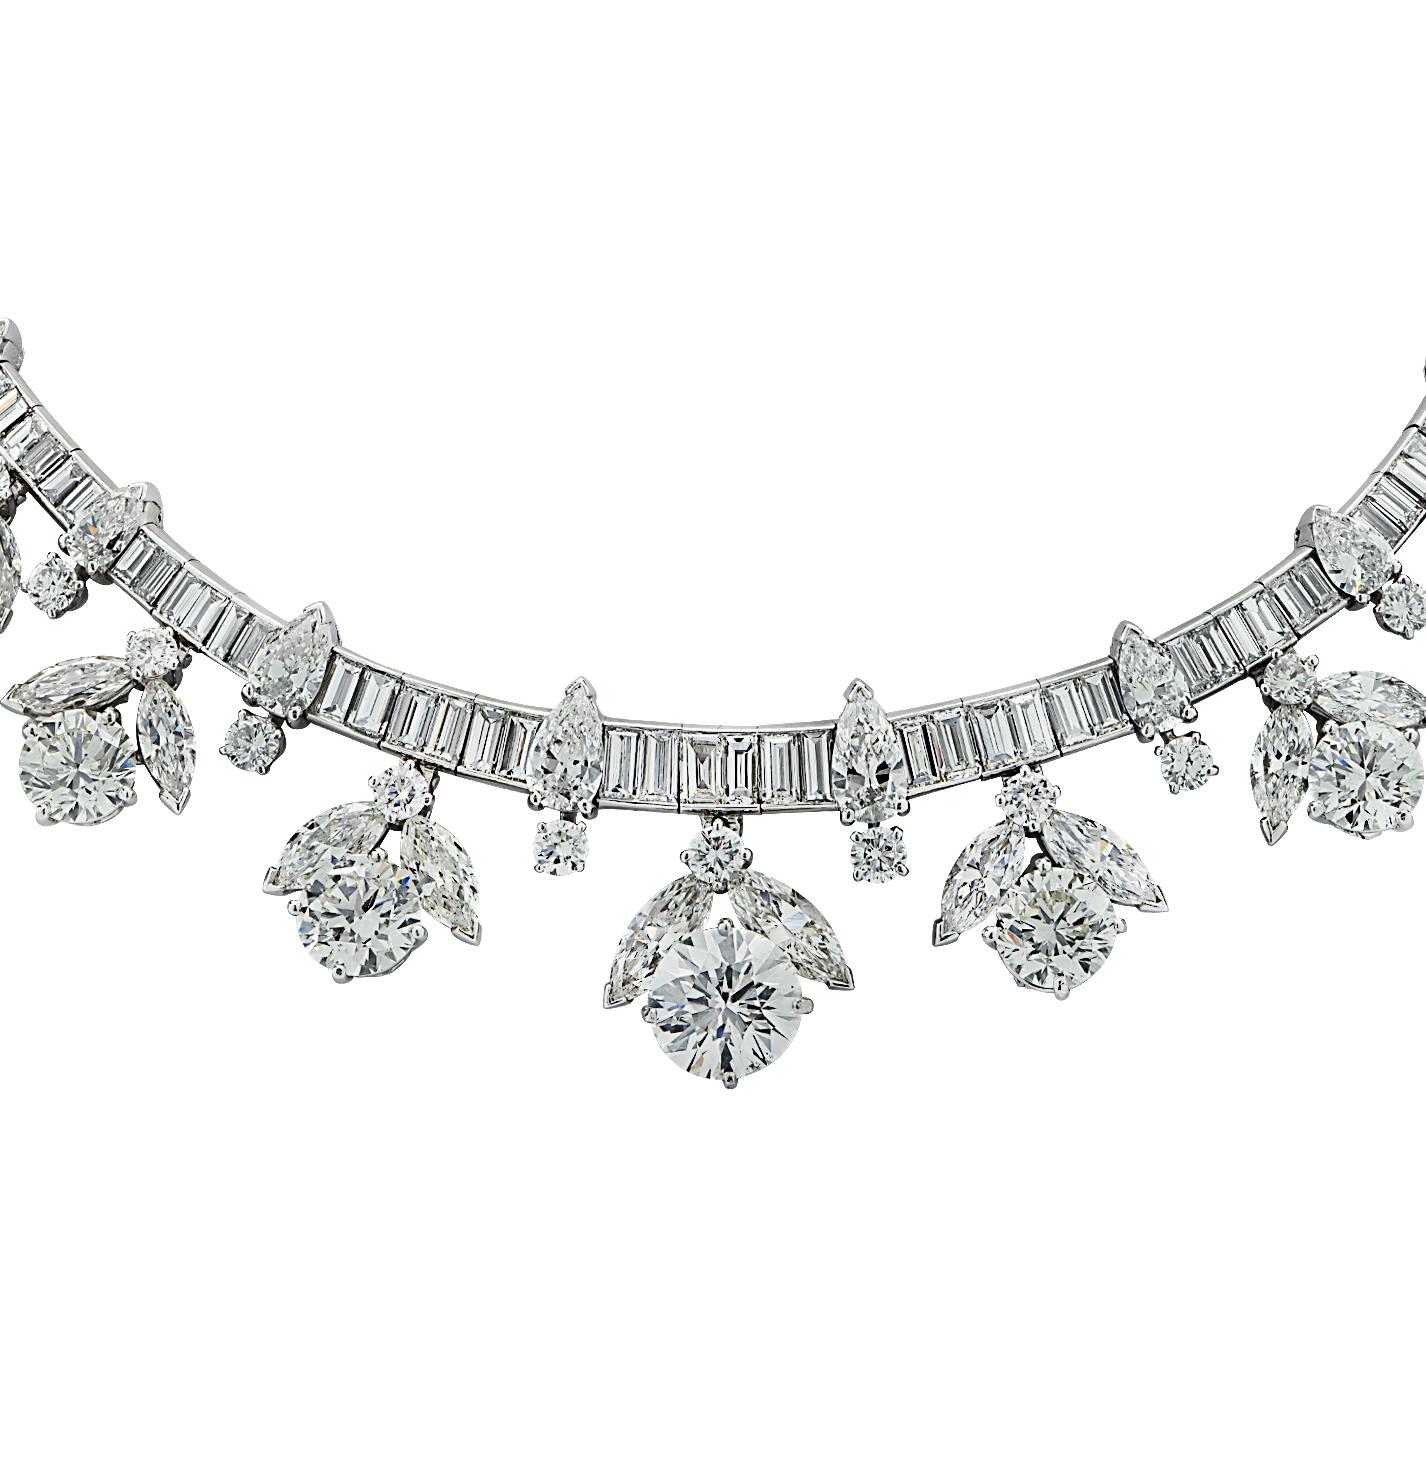 Superb mid-century diamond cluster necklace crafted in platinum, showcasing 262 mixed cut diamonds weighing approximately 56.50 carats total. Round brilliant and emerald cut diamonds adorned with diamond flower clusters, sweep around the neck in a